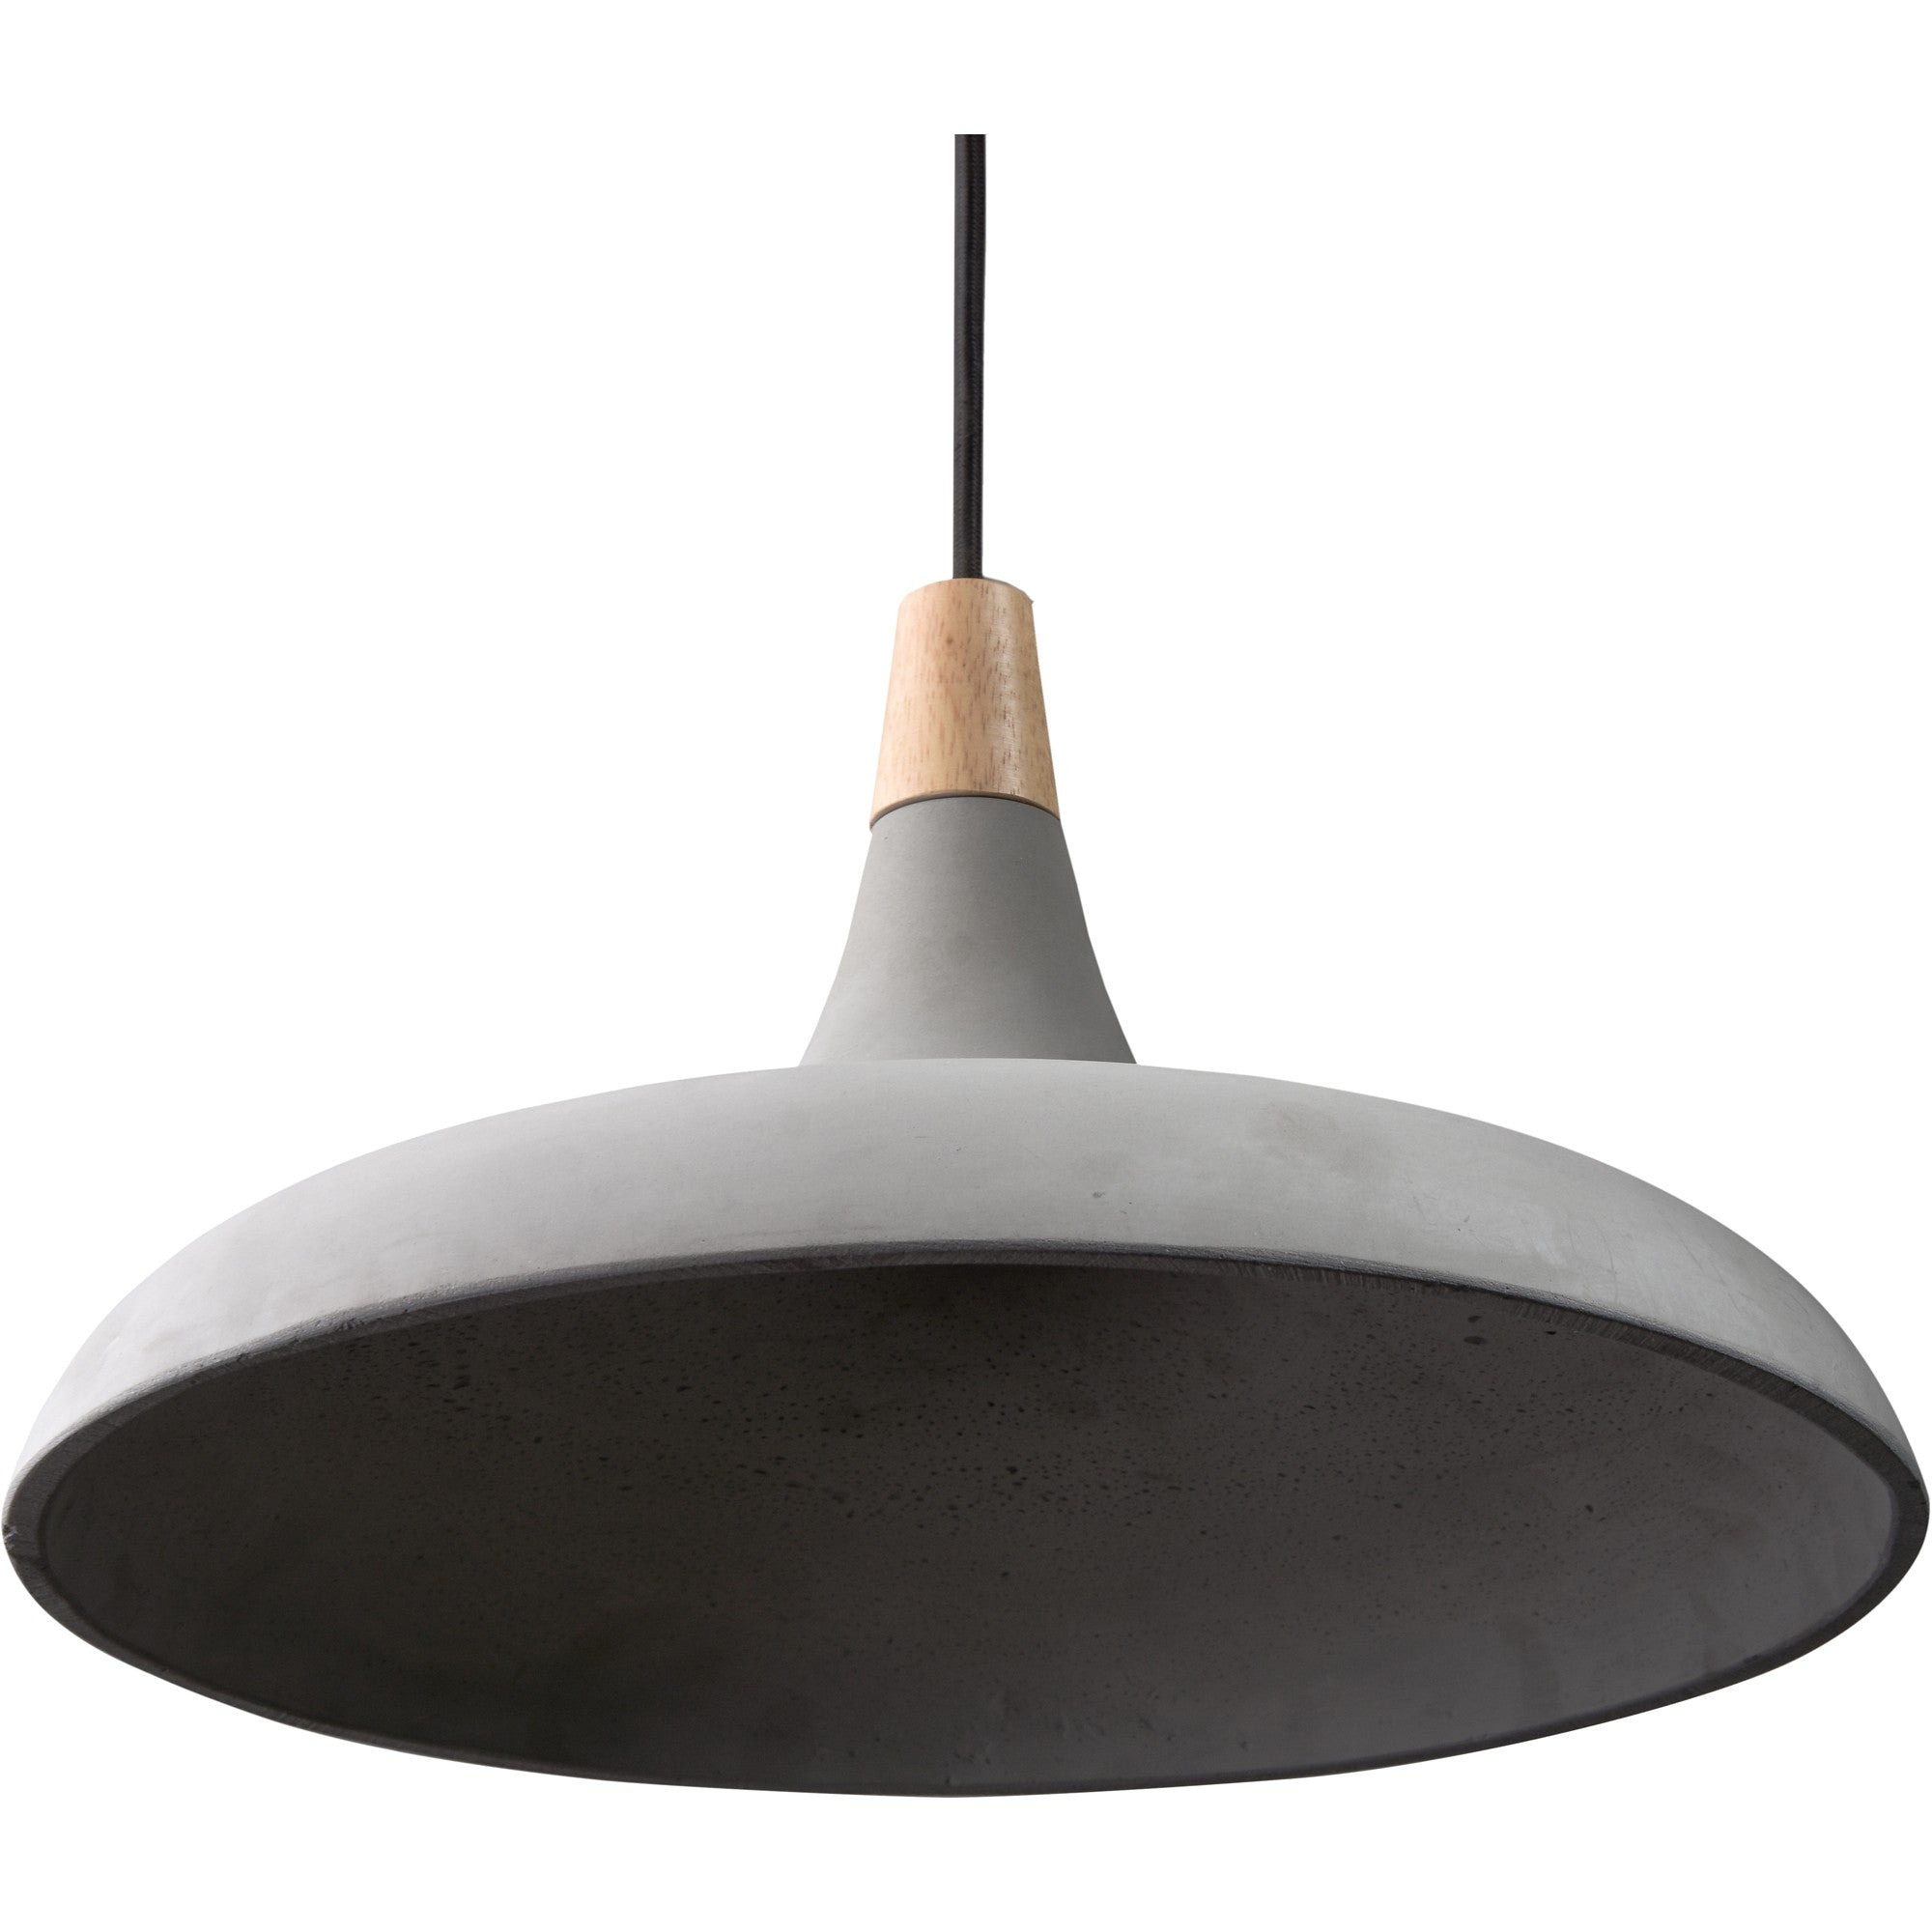 Viola-May | Ceiling Fixture | Pendant| Contemporary | Modern | Industrial  | Kitchen 